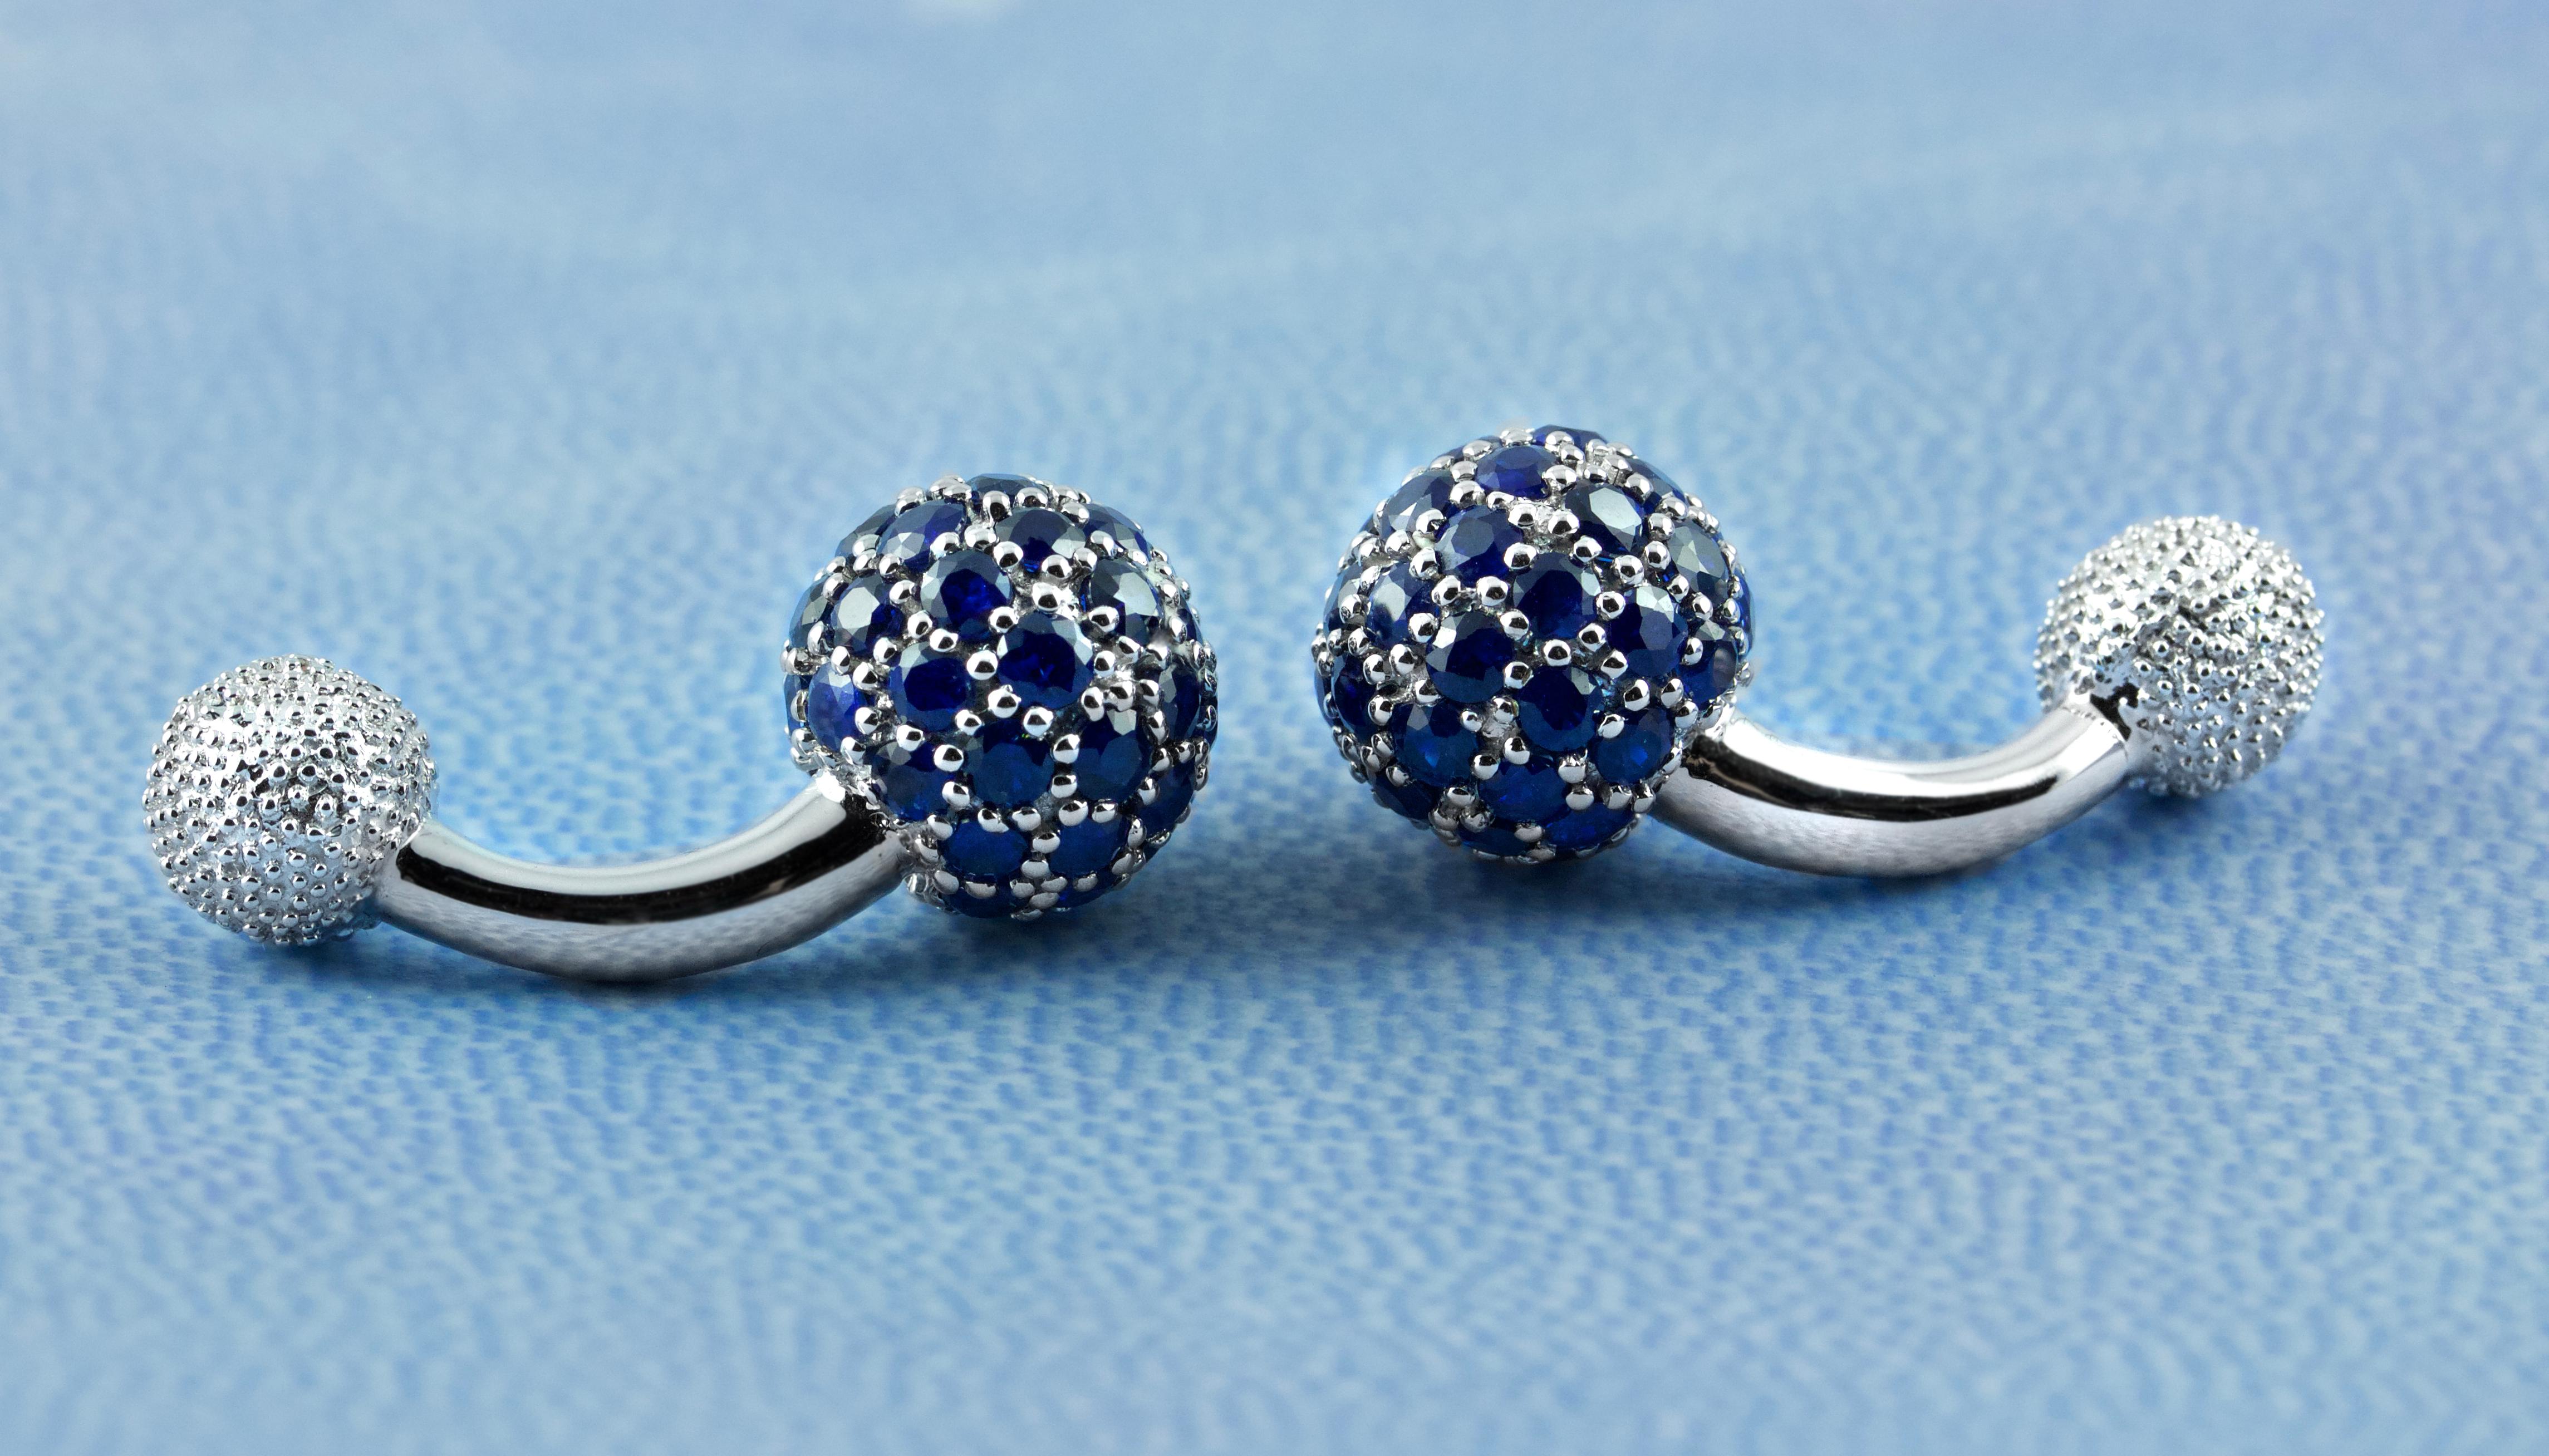 These elegant cufflinks are made entirely of 18k white gold. The large spherical front face is completely covered by sapphires , while the toggle is shaped as a smaller sphere with a multi-faceted texture.
 A curved post with a polished, smooth